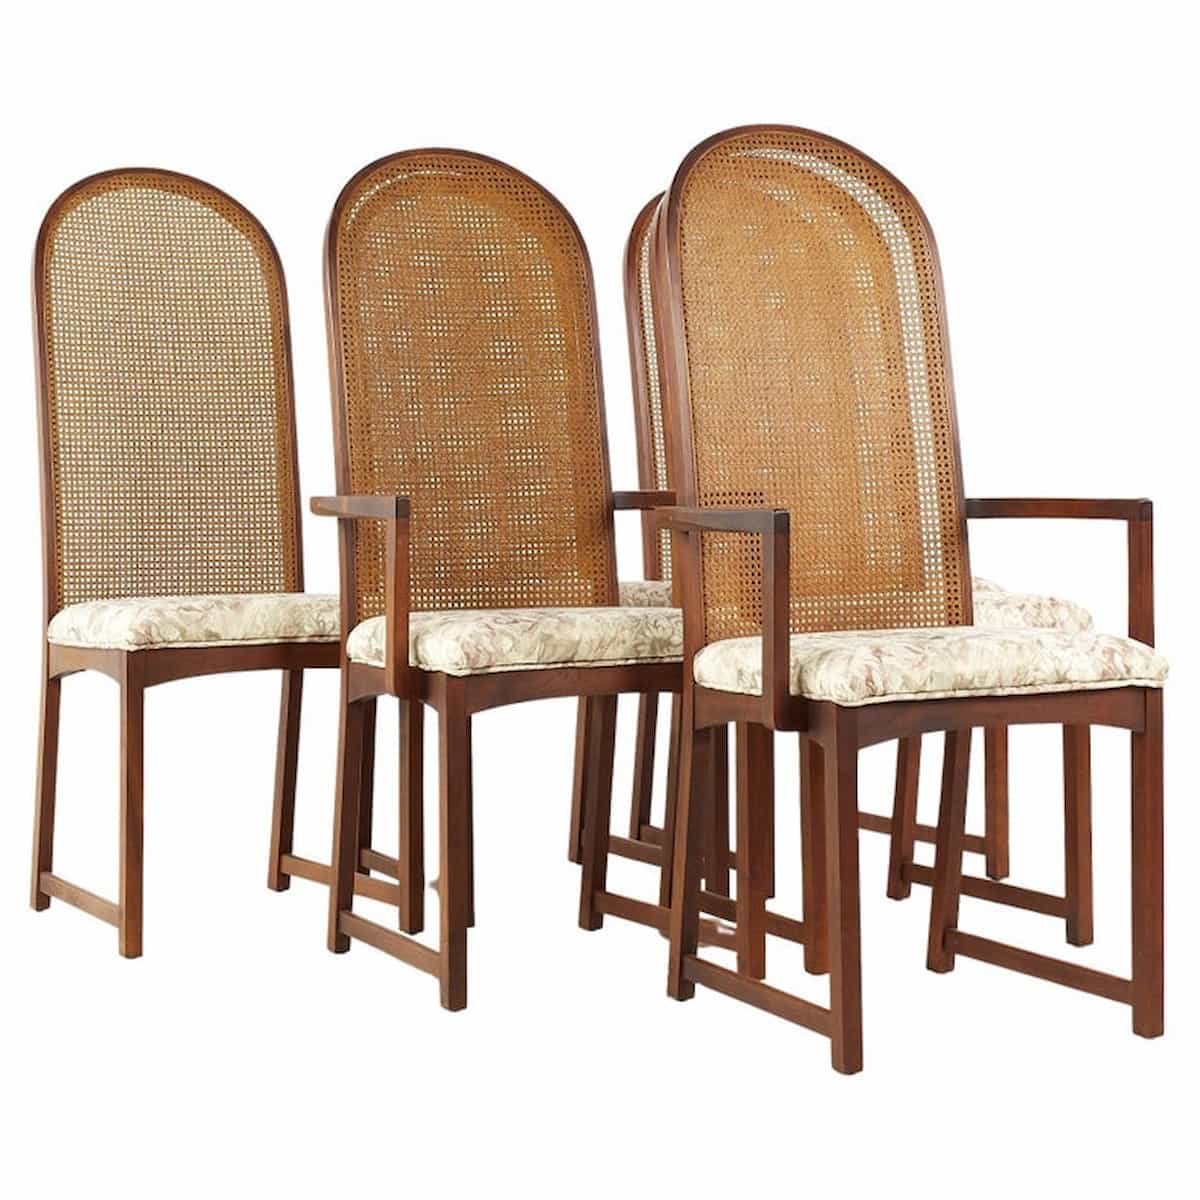 Milo Baughman for Directional Mid Century Walnut and Cane Back Dining Chairs  – Set of 6 | Mid Century Modern Furniture | Modern Hill